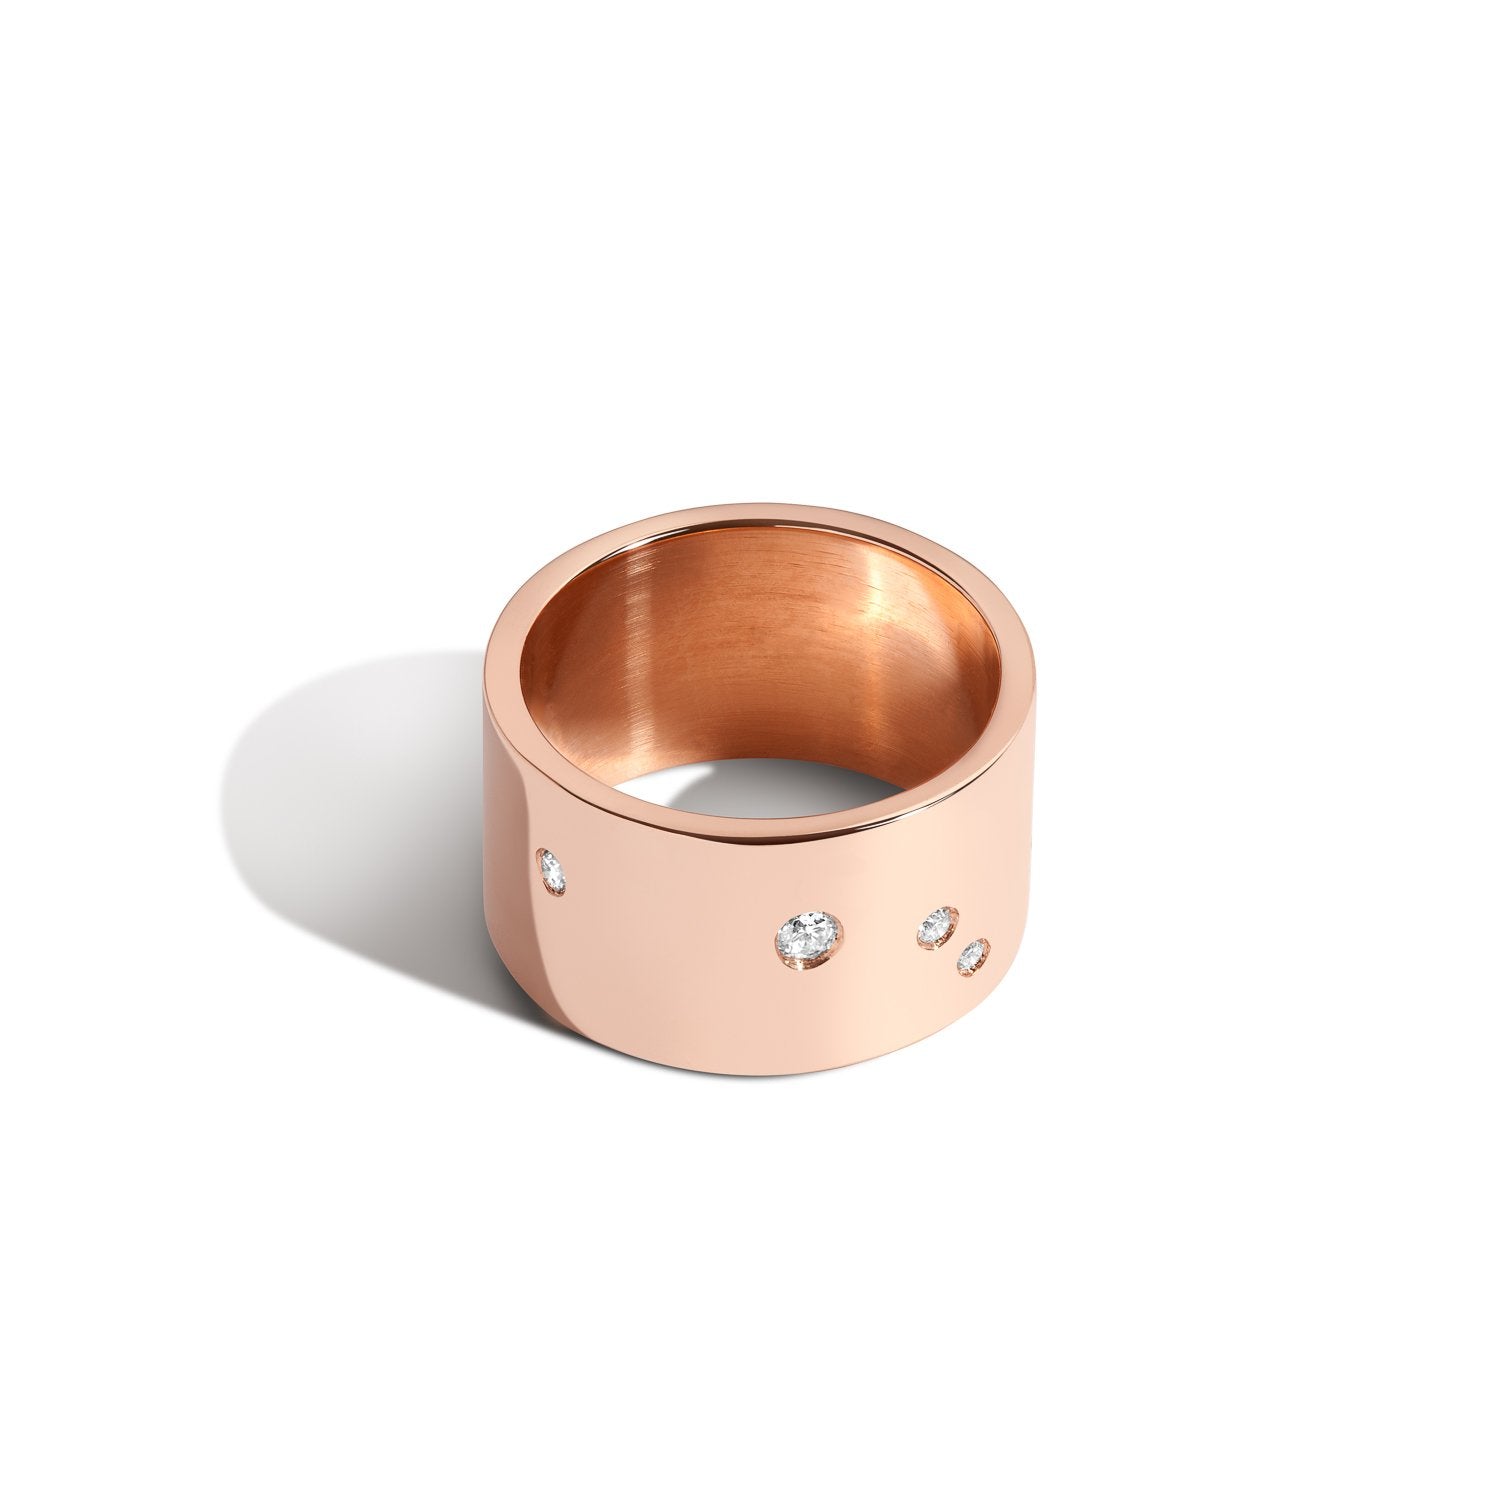 Shahla Karimi Jewelry Zodiac Reveal Ring Collection with White Diamonds - Aries - 14K Rose Gold 